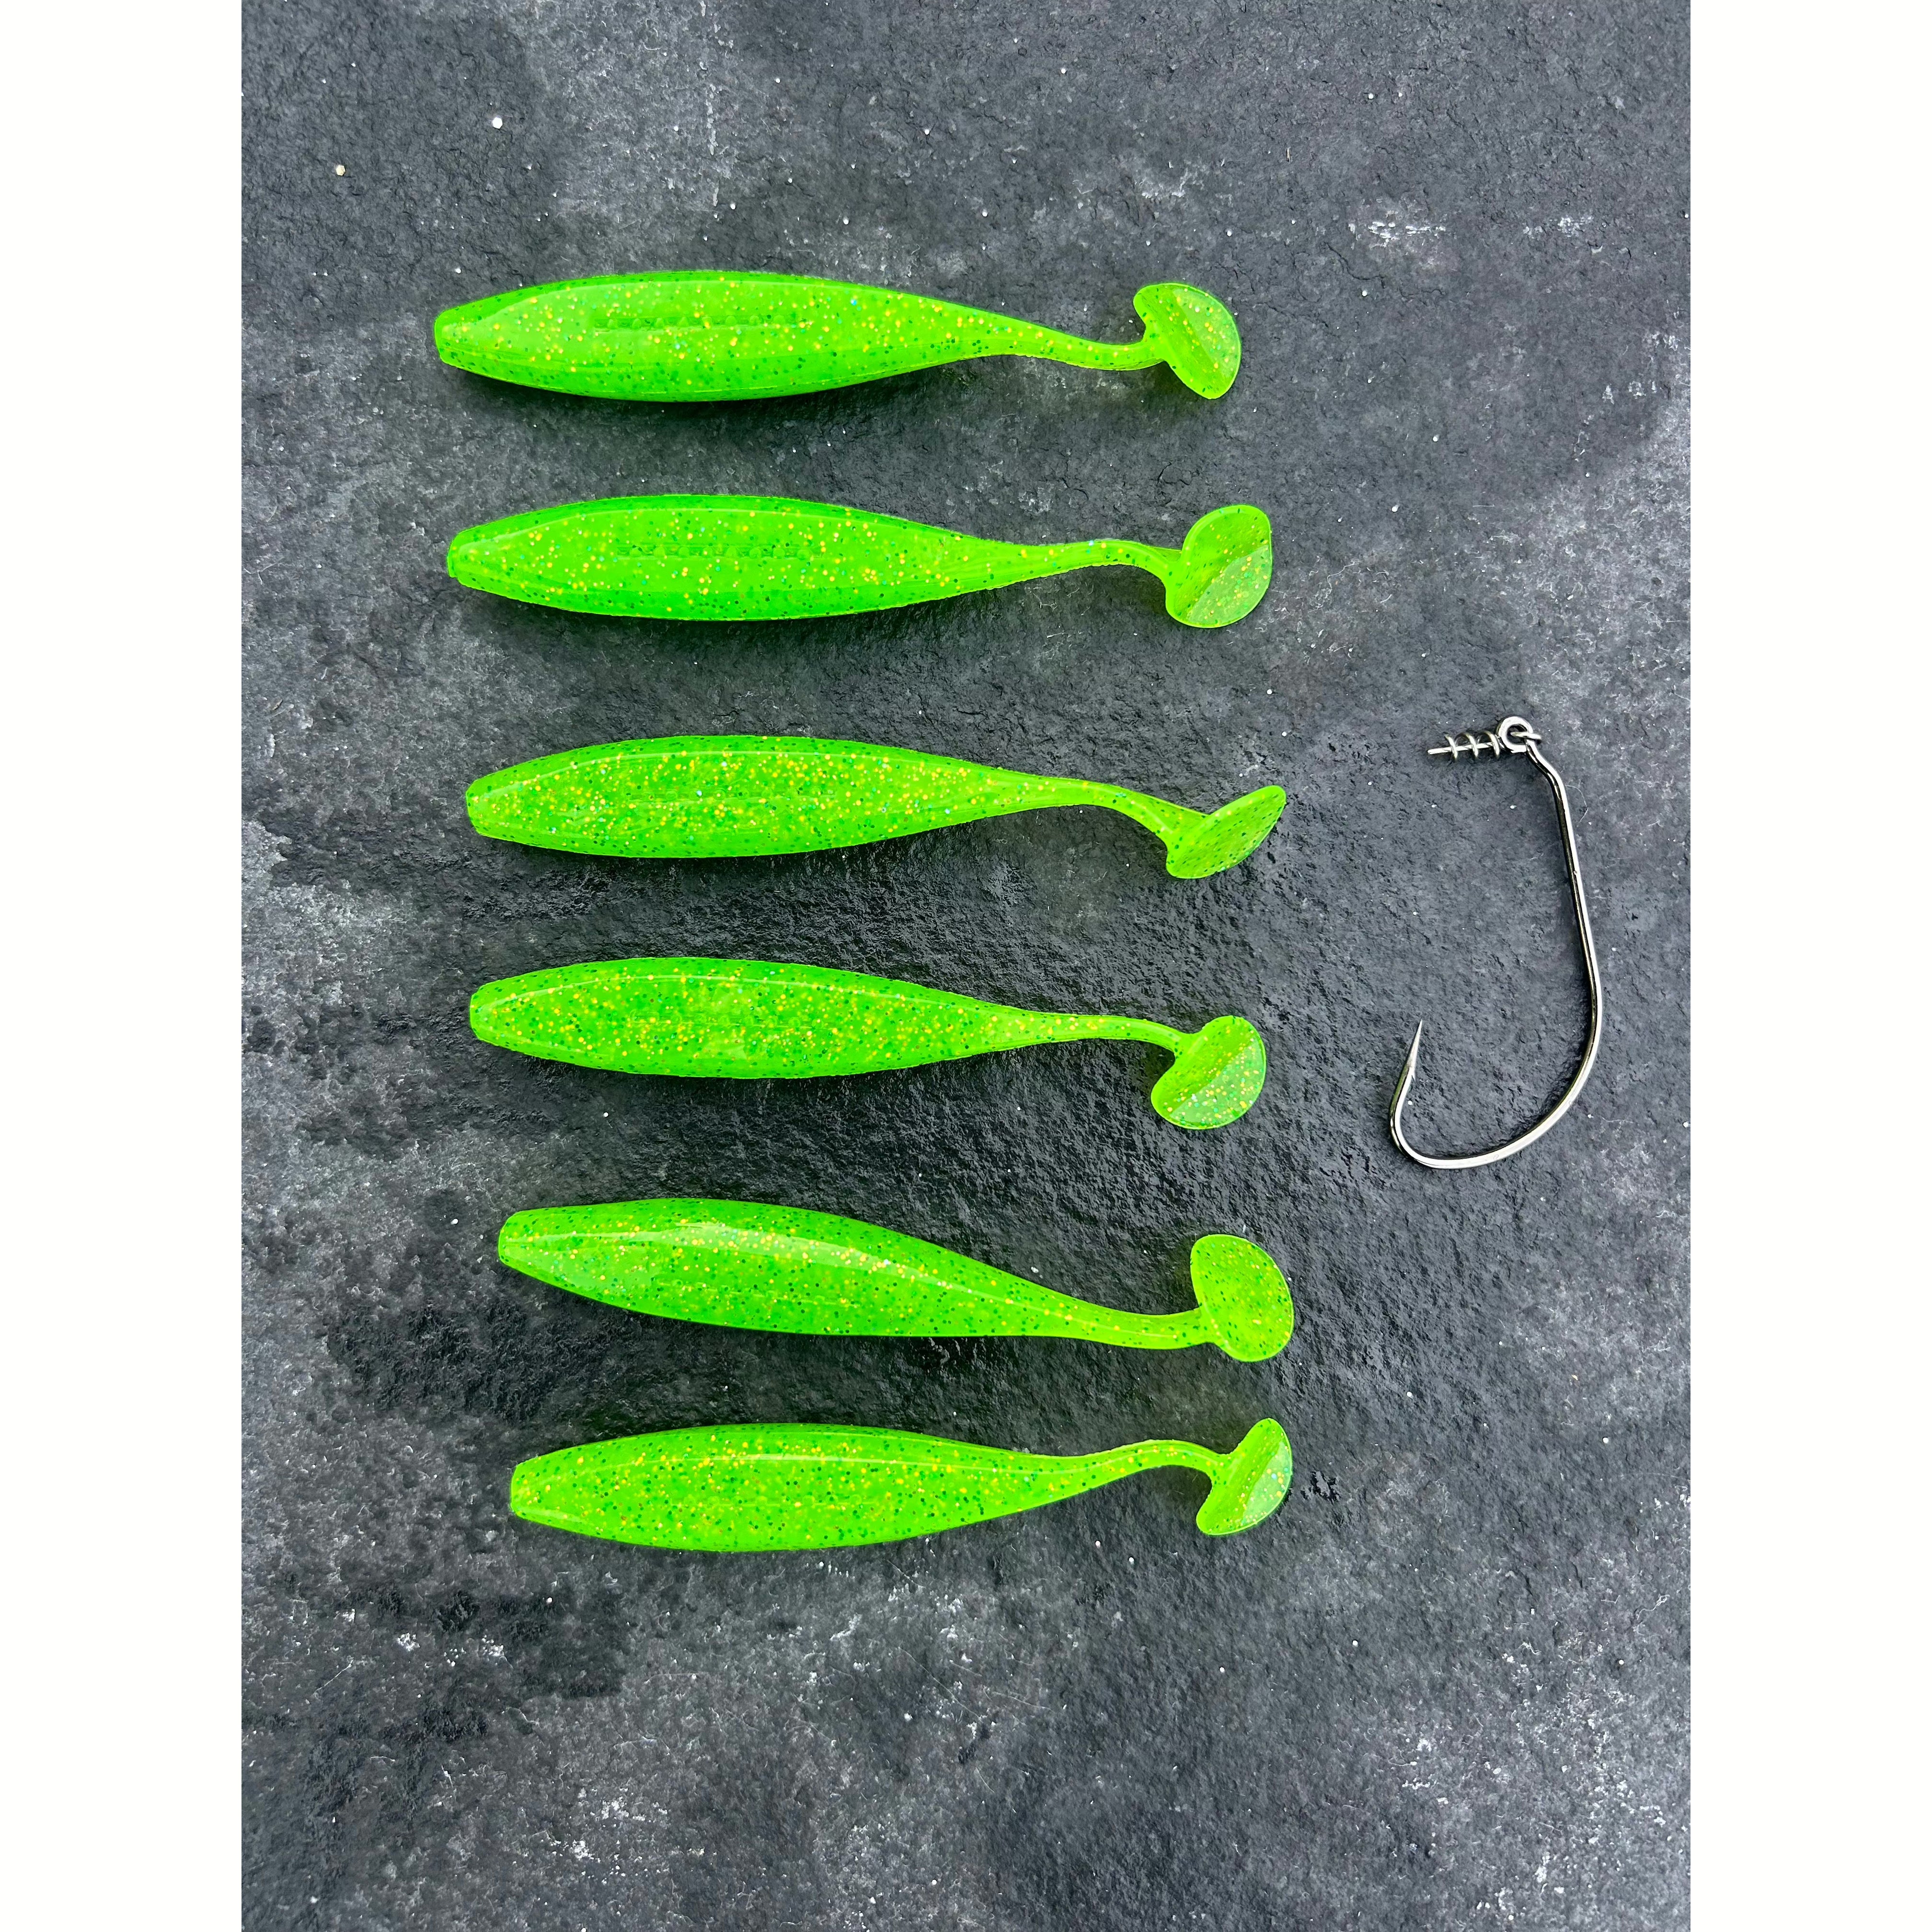 Small Weedless “Salted” LRF Shads 90mm 8g